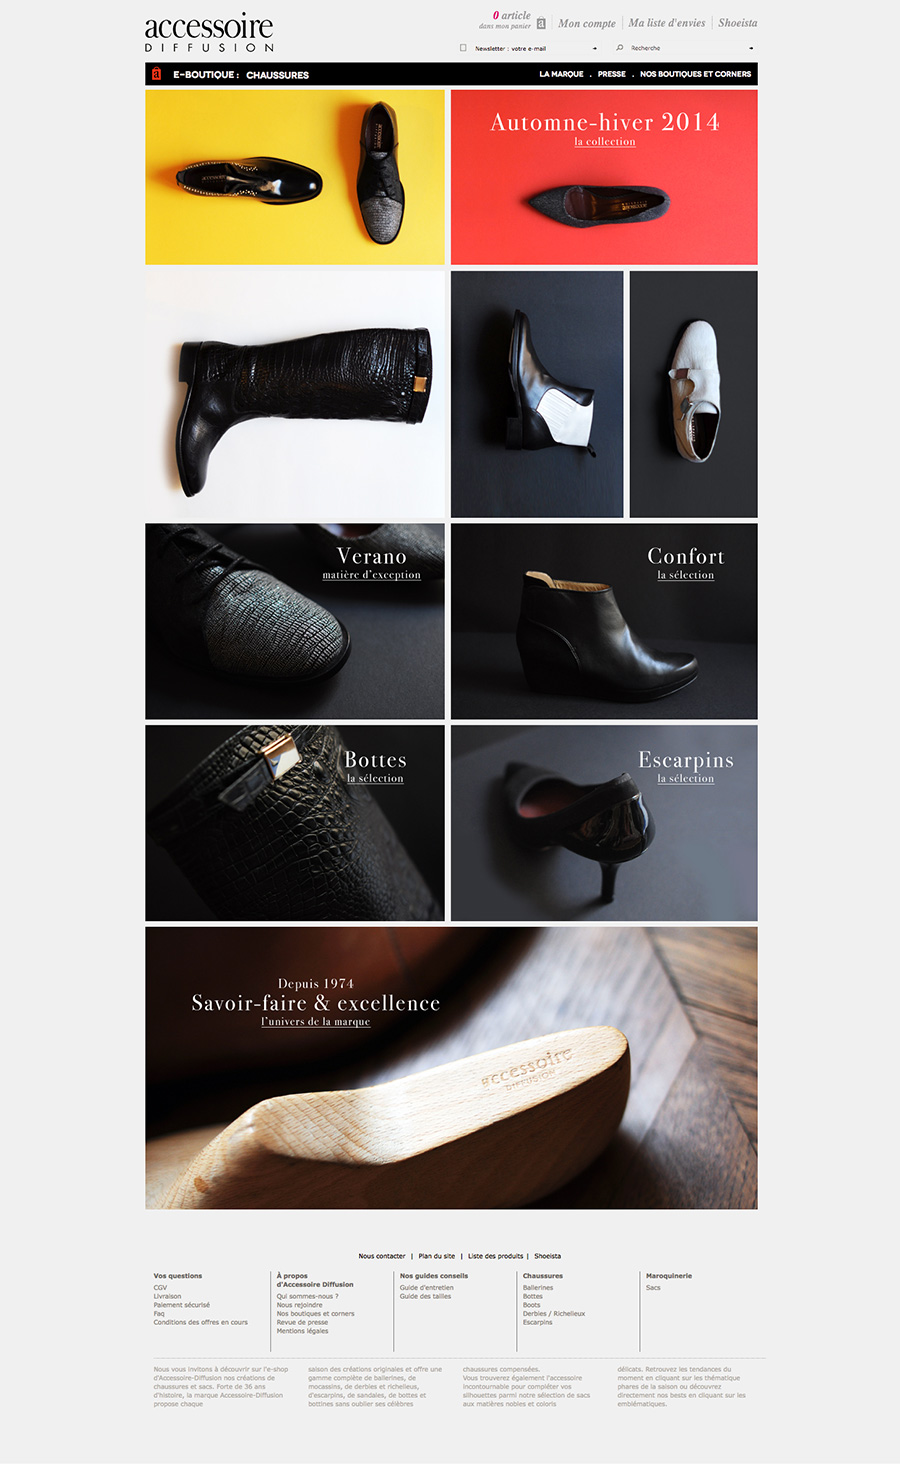 juliebeal-site-accessoiresdiffusion